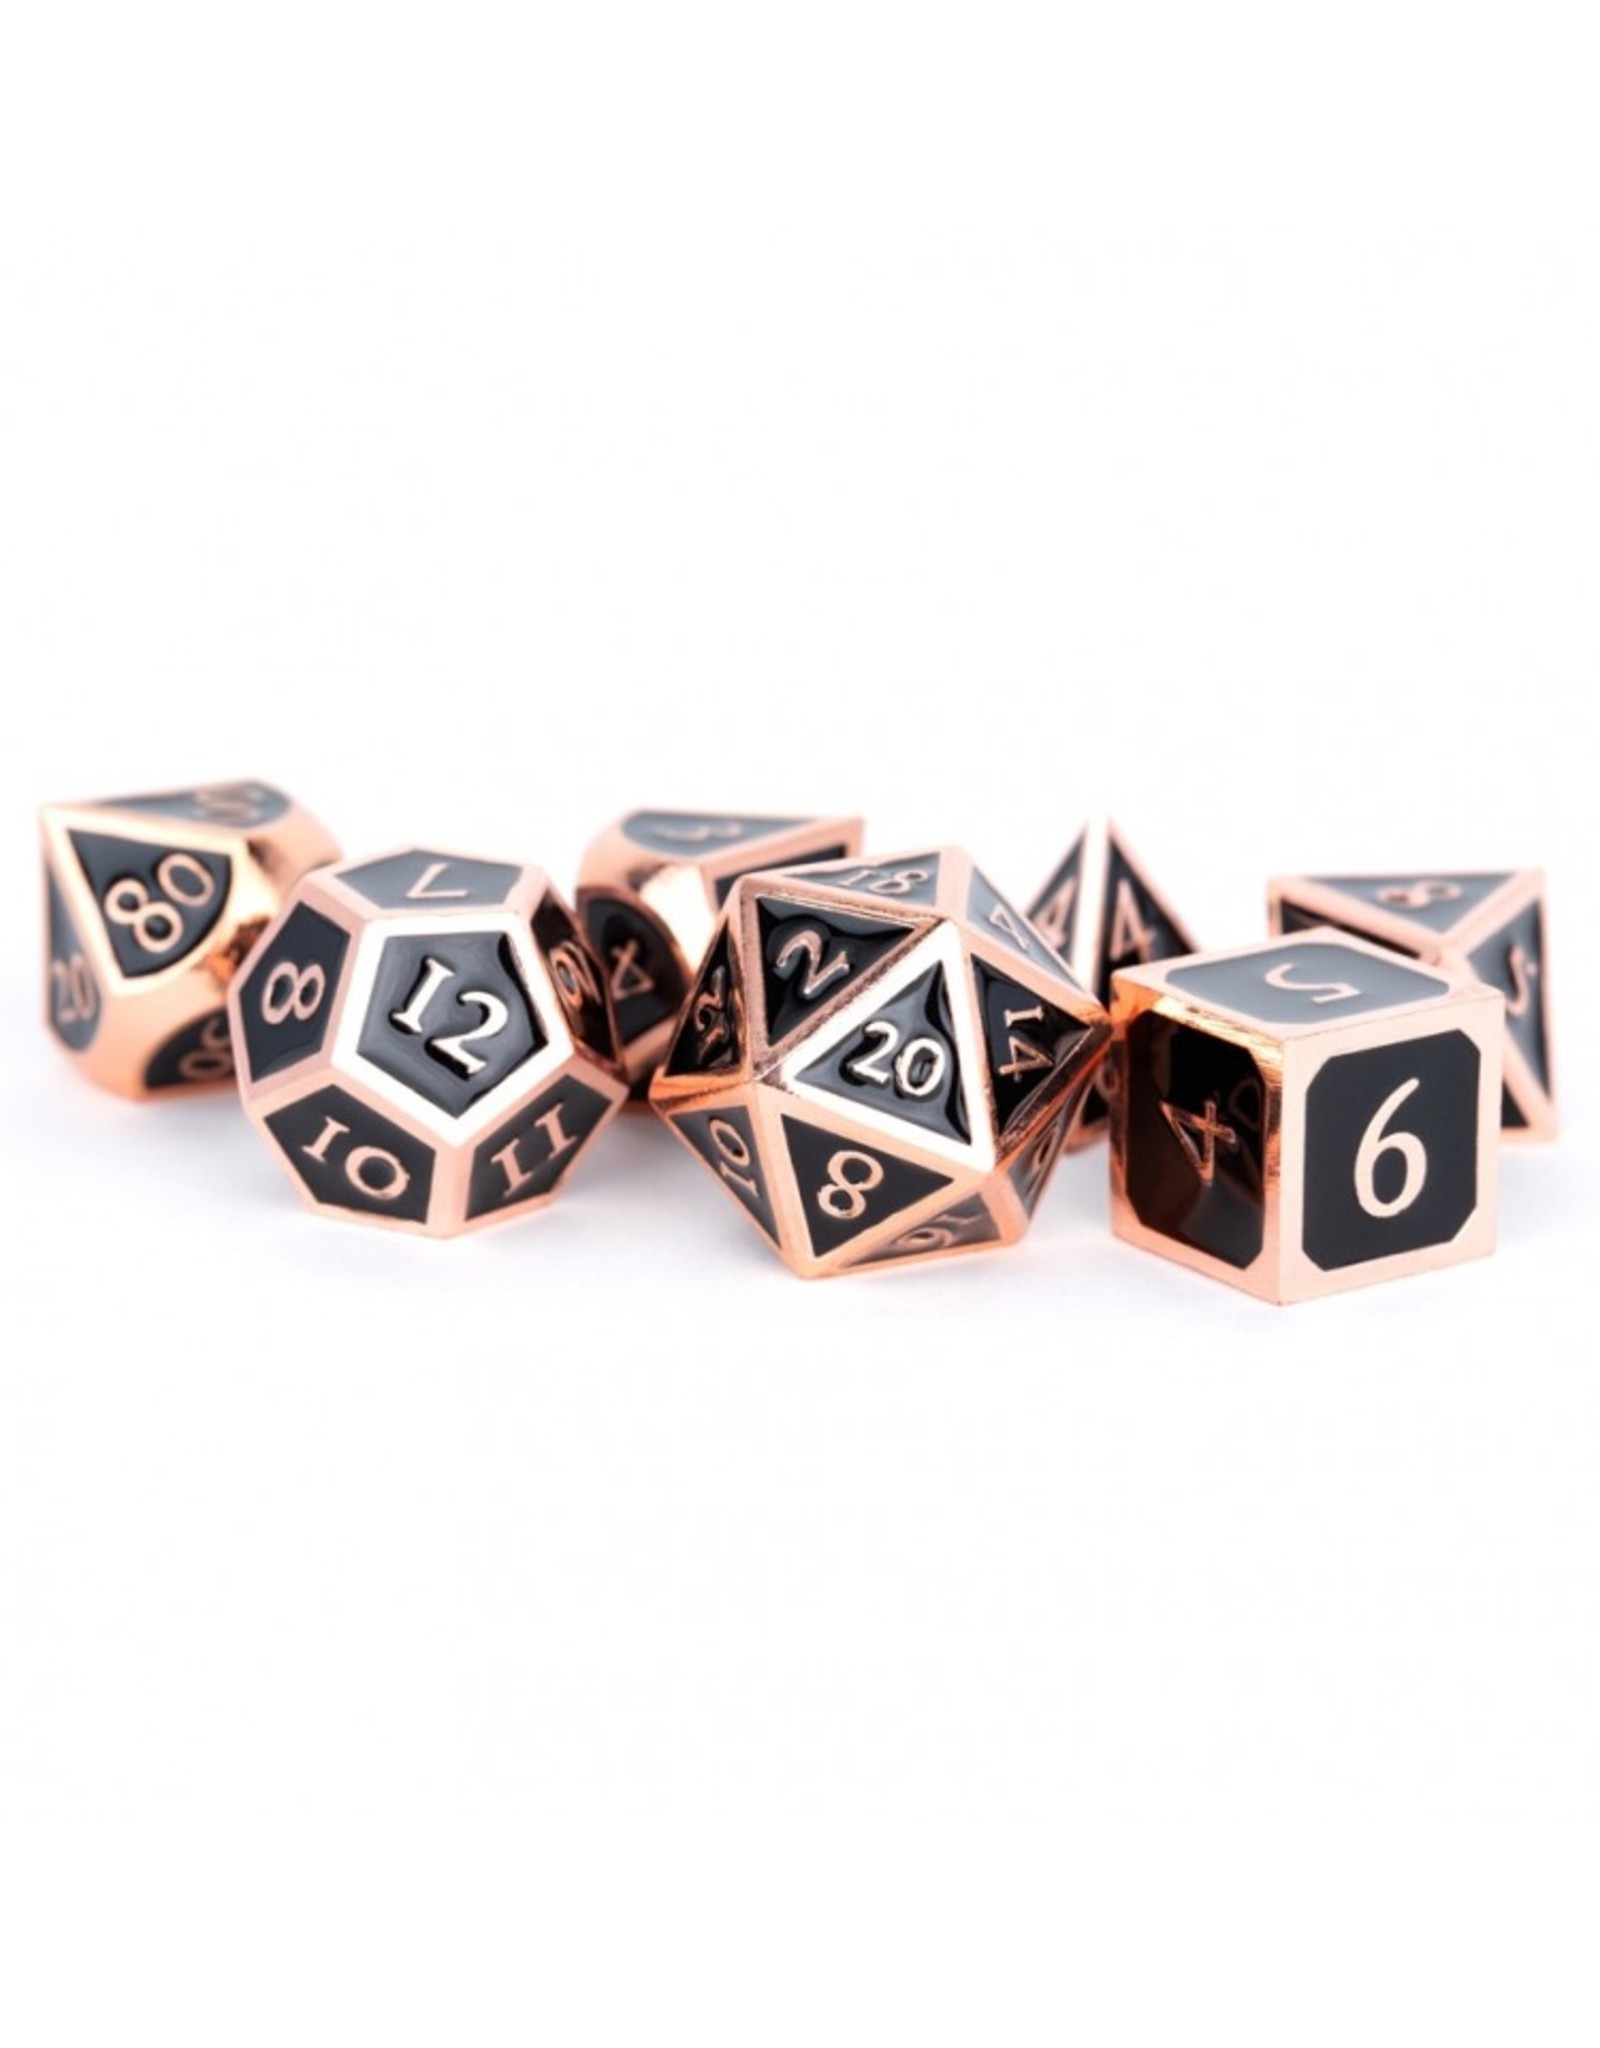 Metallic Dice Games 16mm Polyhedral Dice Set Antique Copper with Black Enamel